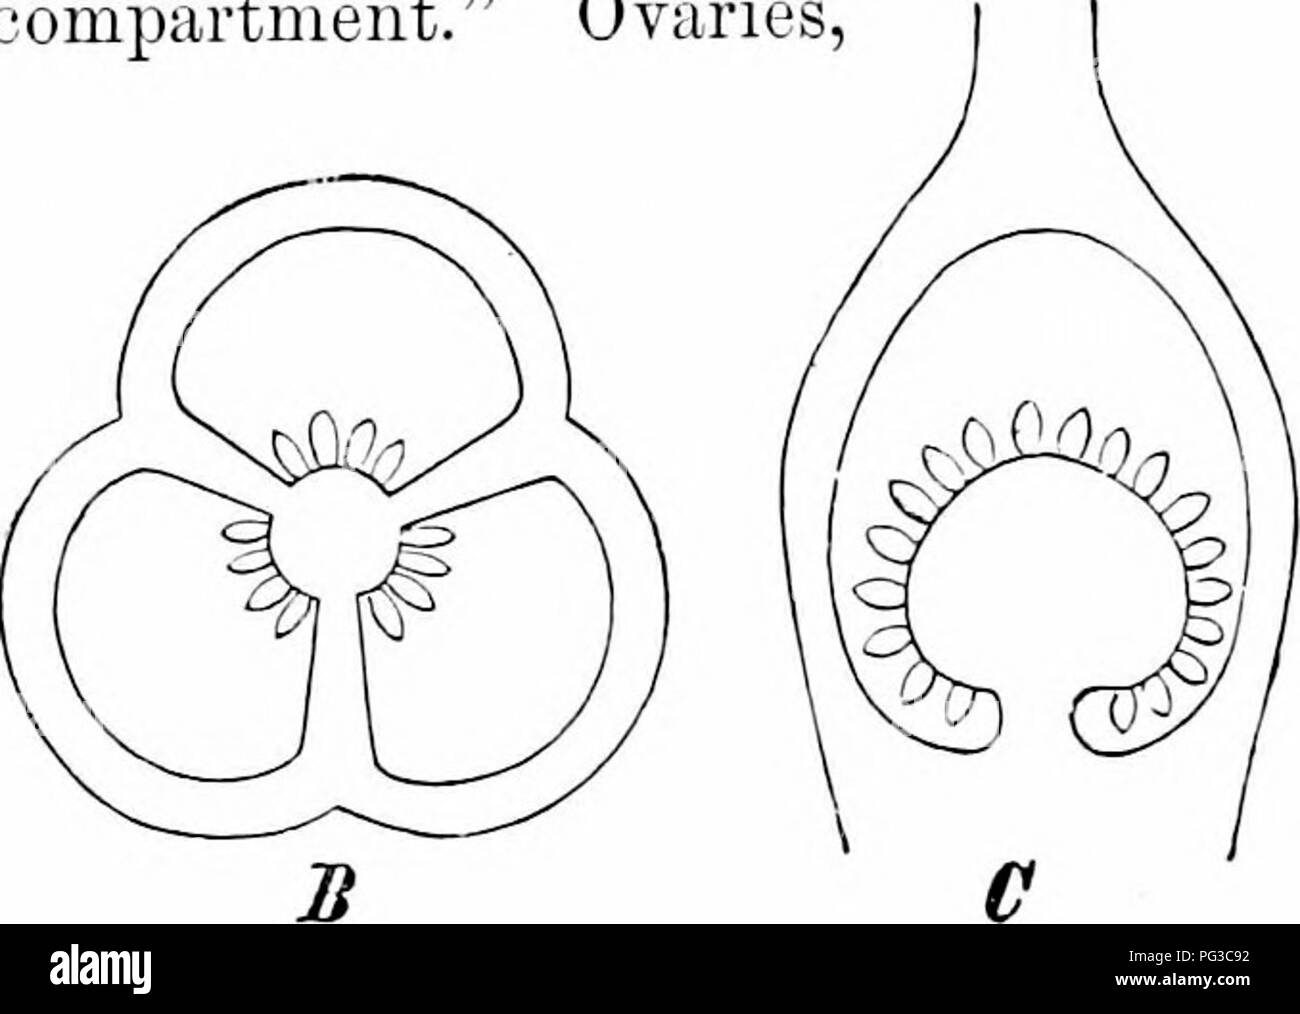 . Plant studies; an elementary botany. Botany. Fig. 3^5. Diagrammatic f^ectioTis of ovaries; A. cross-section of an ovary with one loculiis and three carpels, tlio tliree sets of ovules said to be attached to the wall (parietal); B. cross-section of an ovary 1th three loculi and three carpels, the ovules being in the center (central) ; C, longitudinal section of i&gt;.—After Schim- therefore, may have one loculus or several loculi. &quot;Where there are several loculi each one usually represents a con- stitutent carpel (Fig. 325, B); where there is one loculus the ovary may comprise one carp Stock Photo